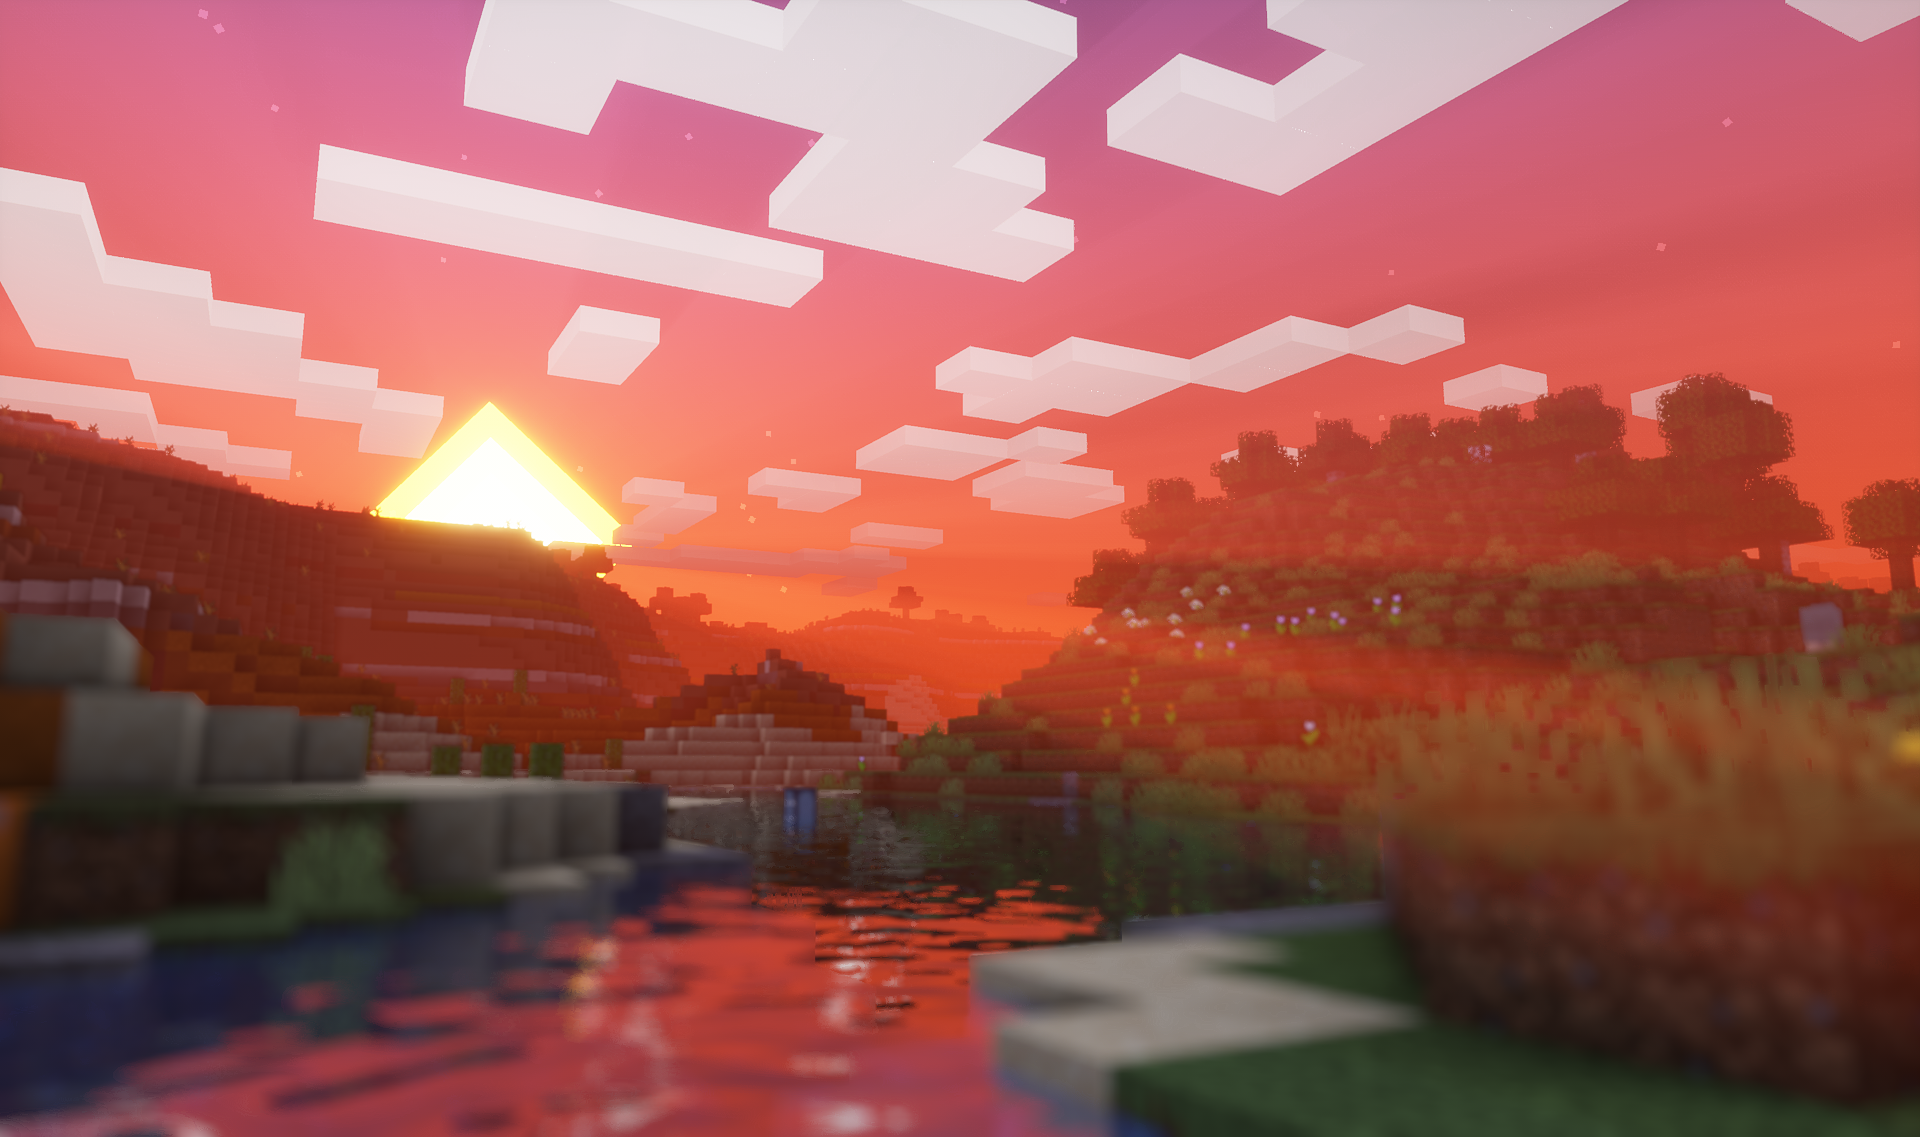 images/2406/14/DrDestens_MCShaders_4.png